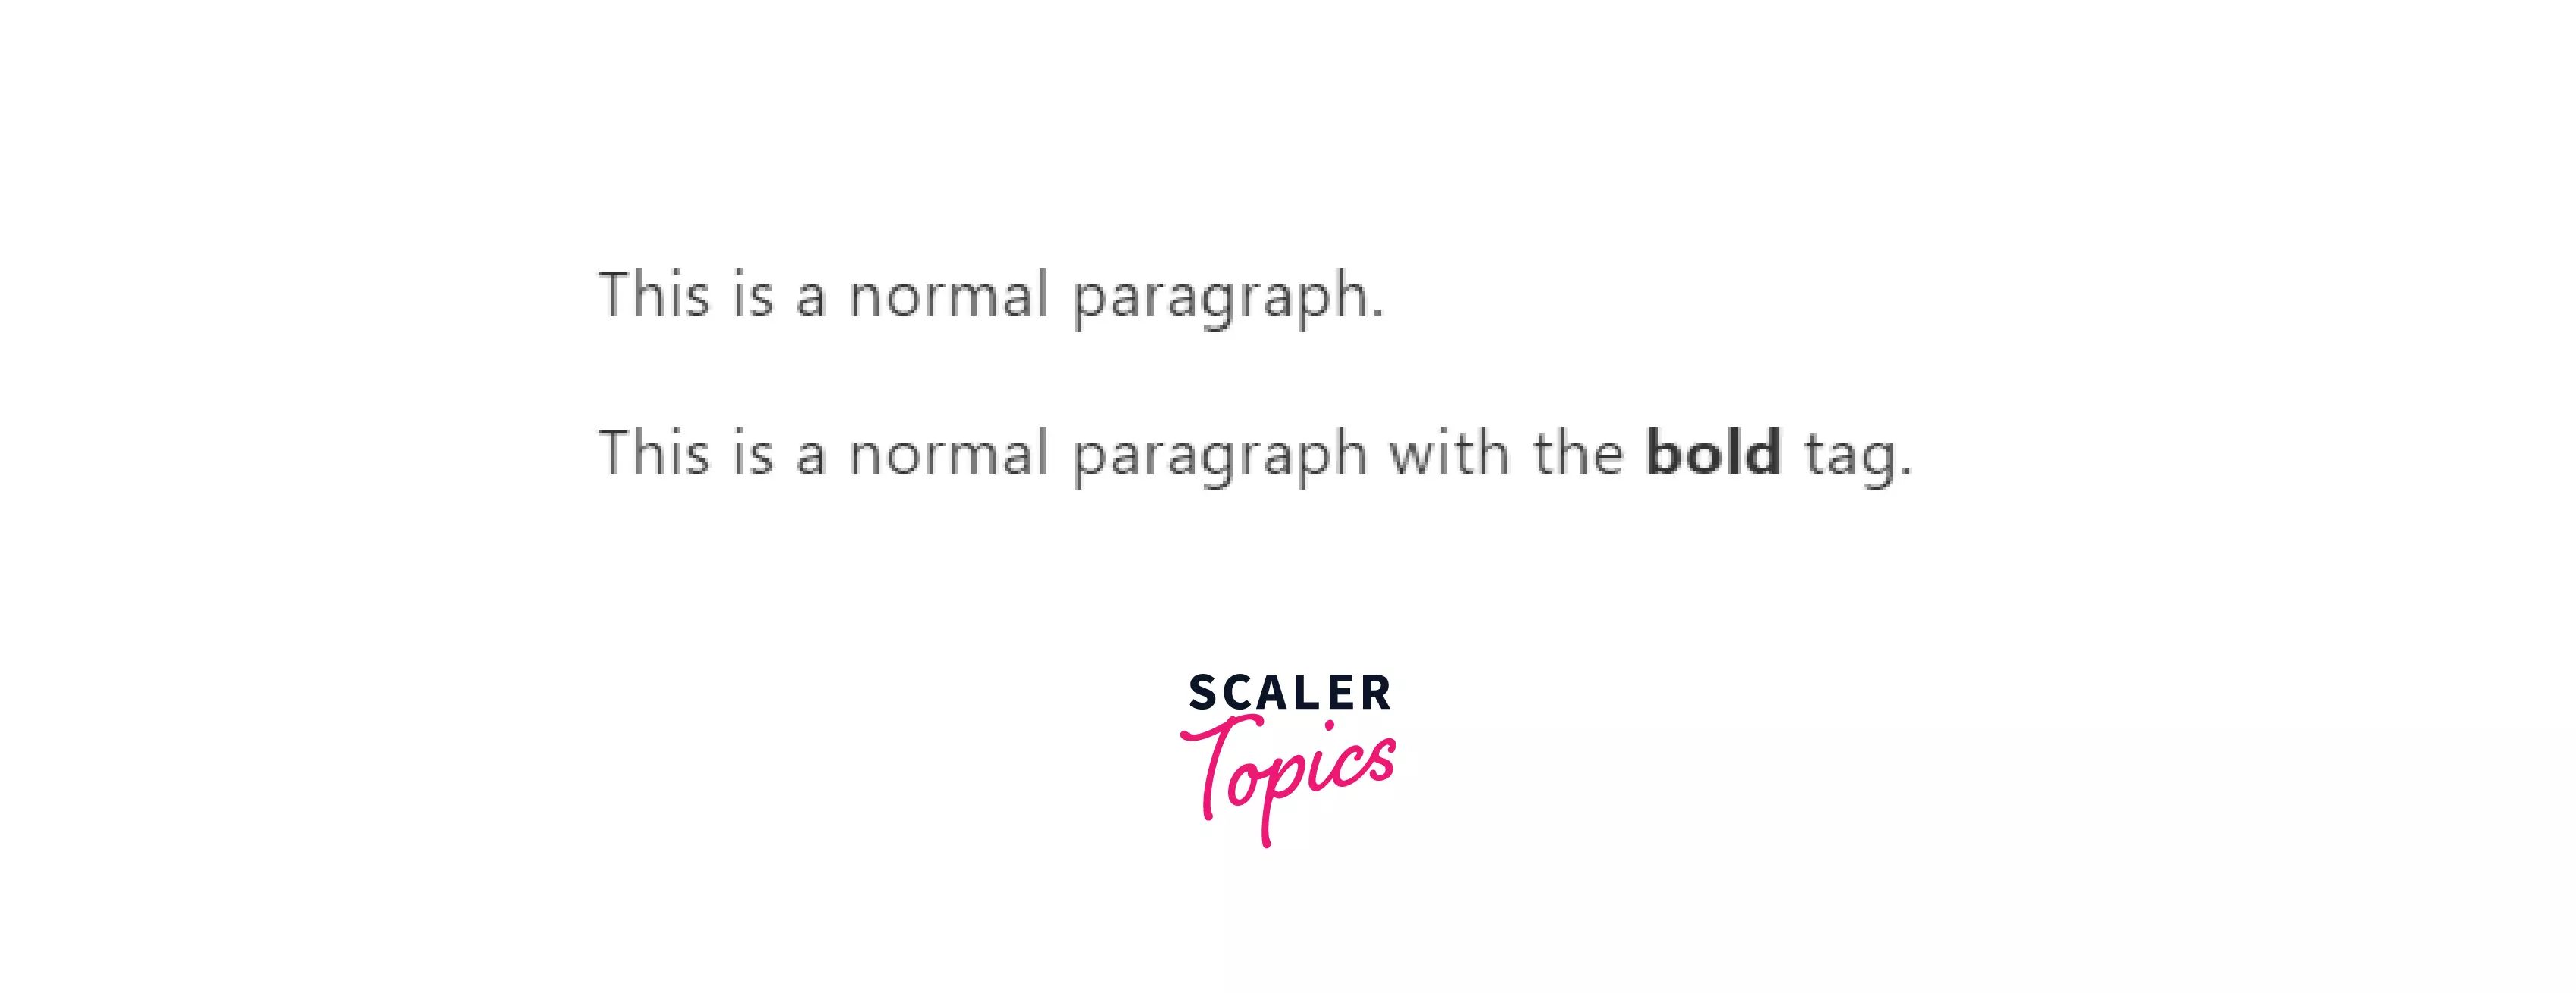 Difference between Bold and Paragraph tag